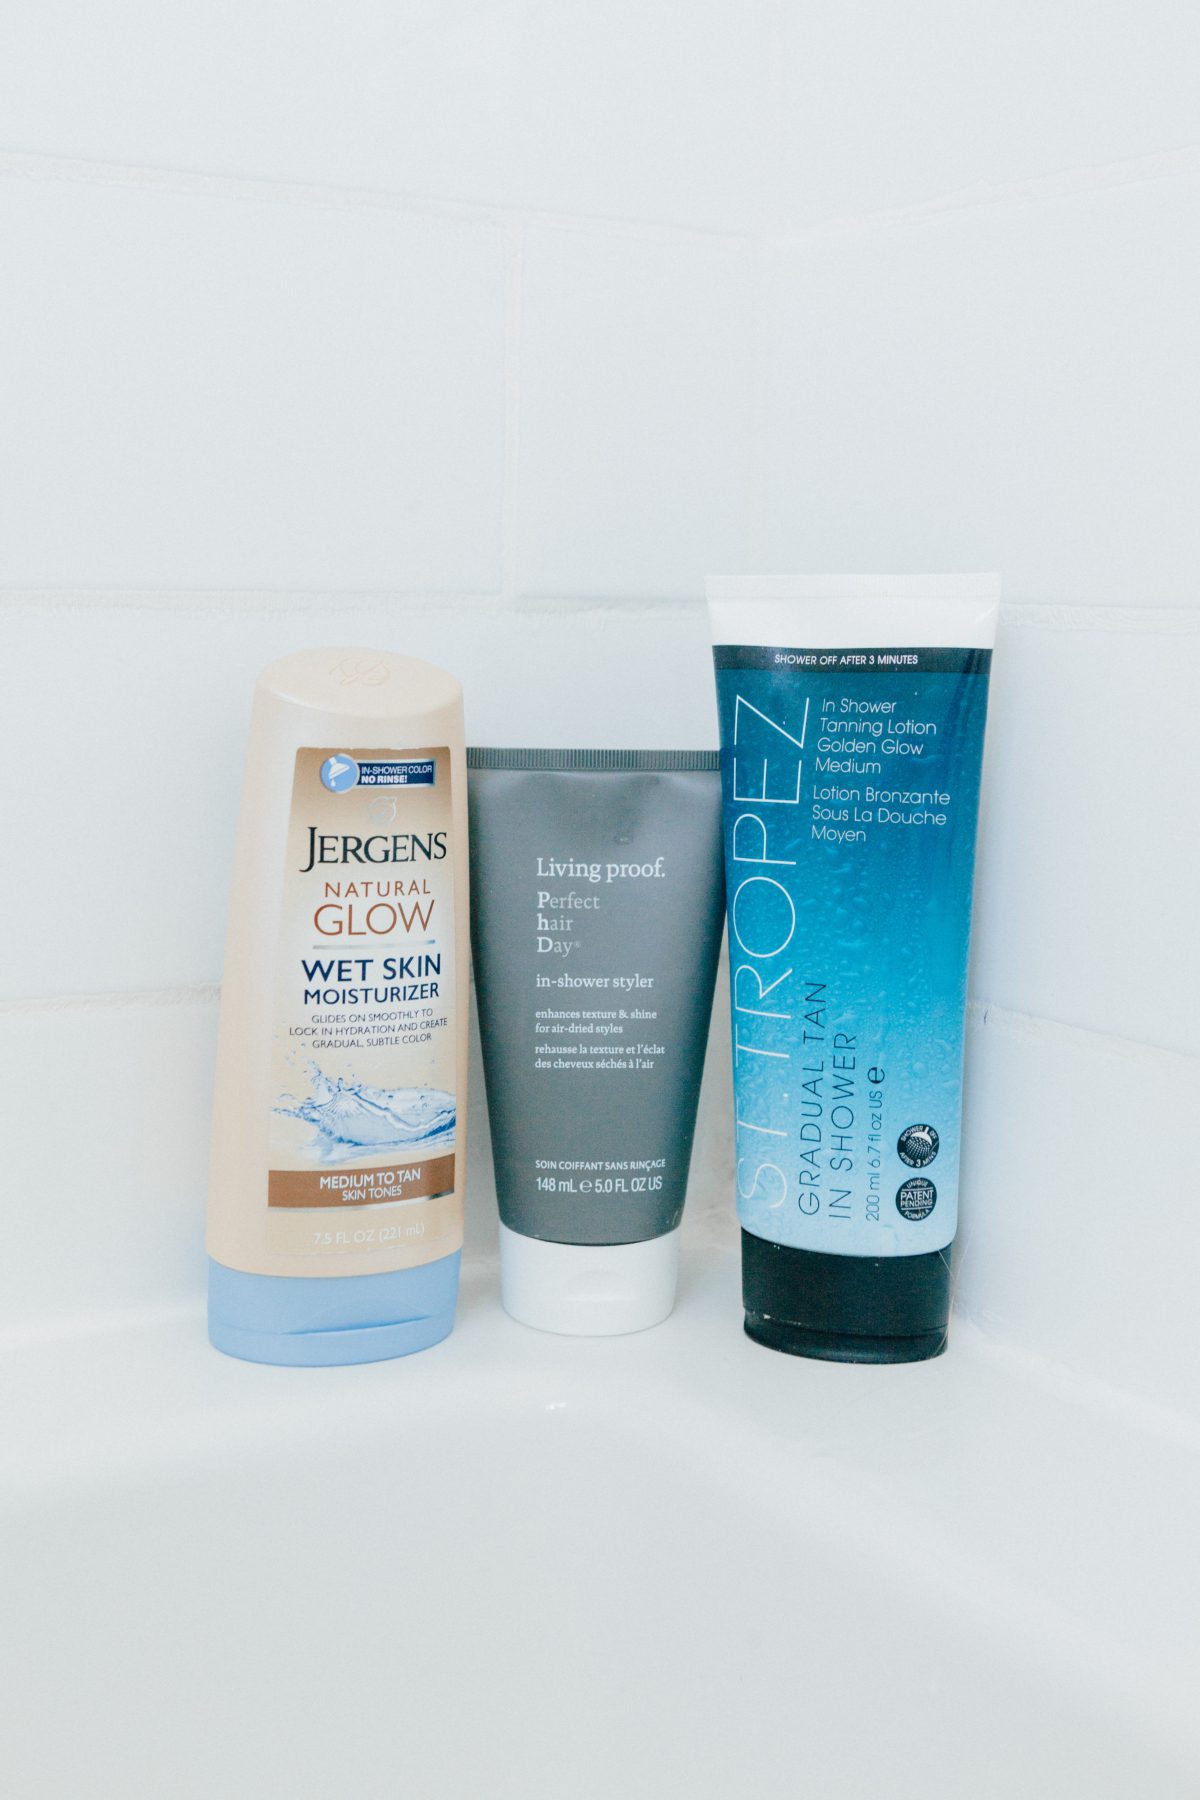 in-shower beauty products